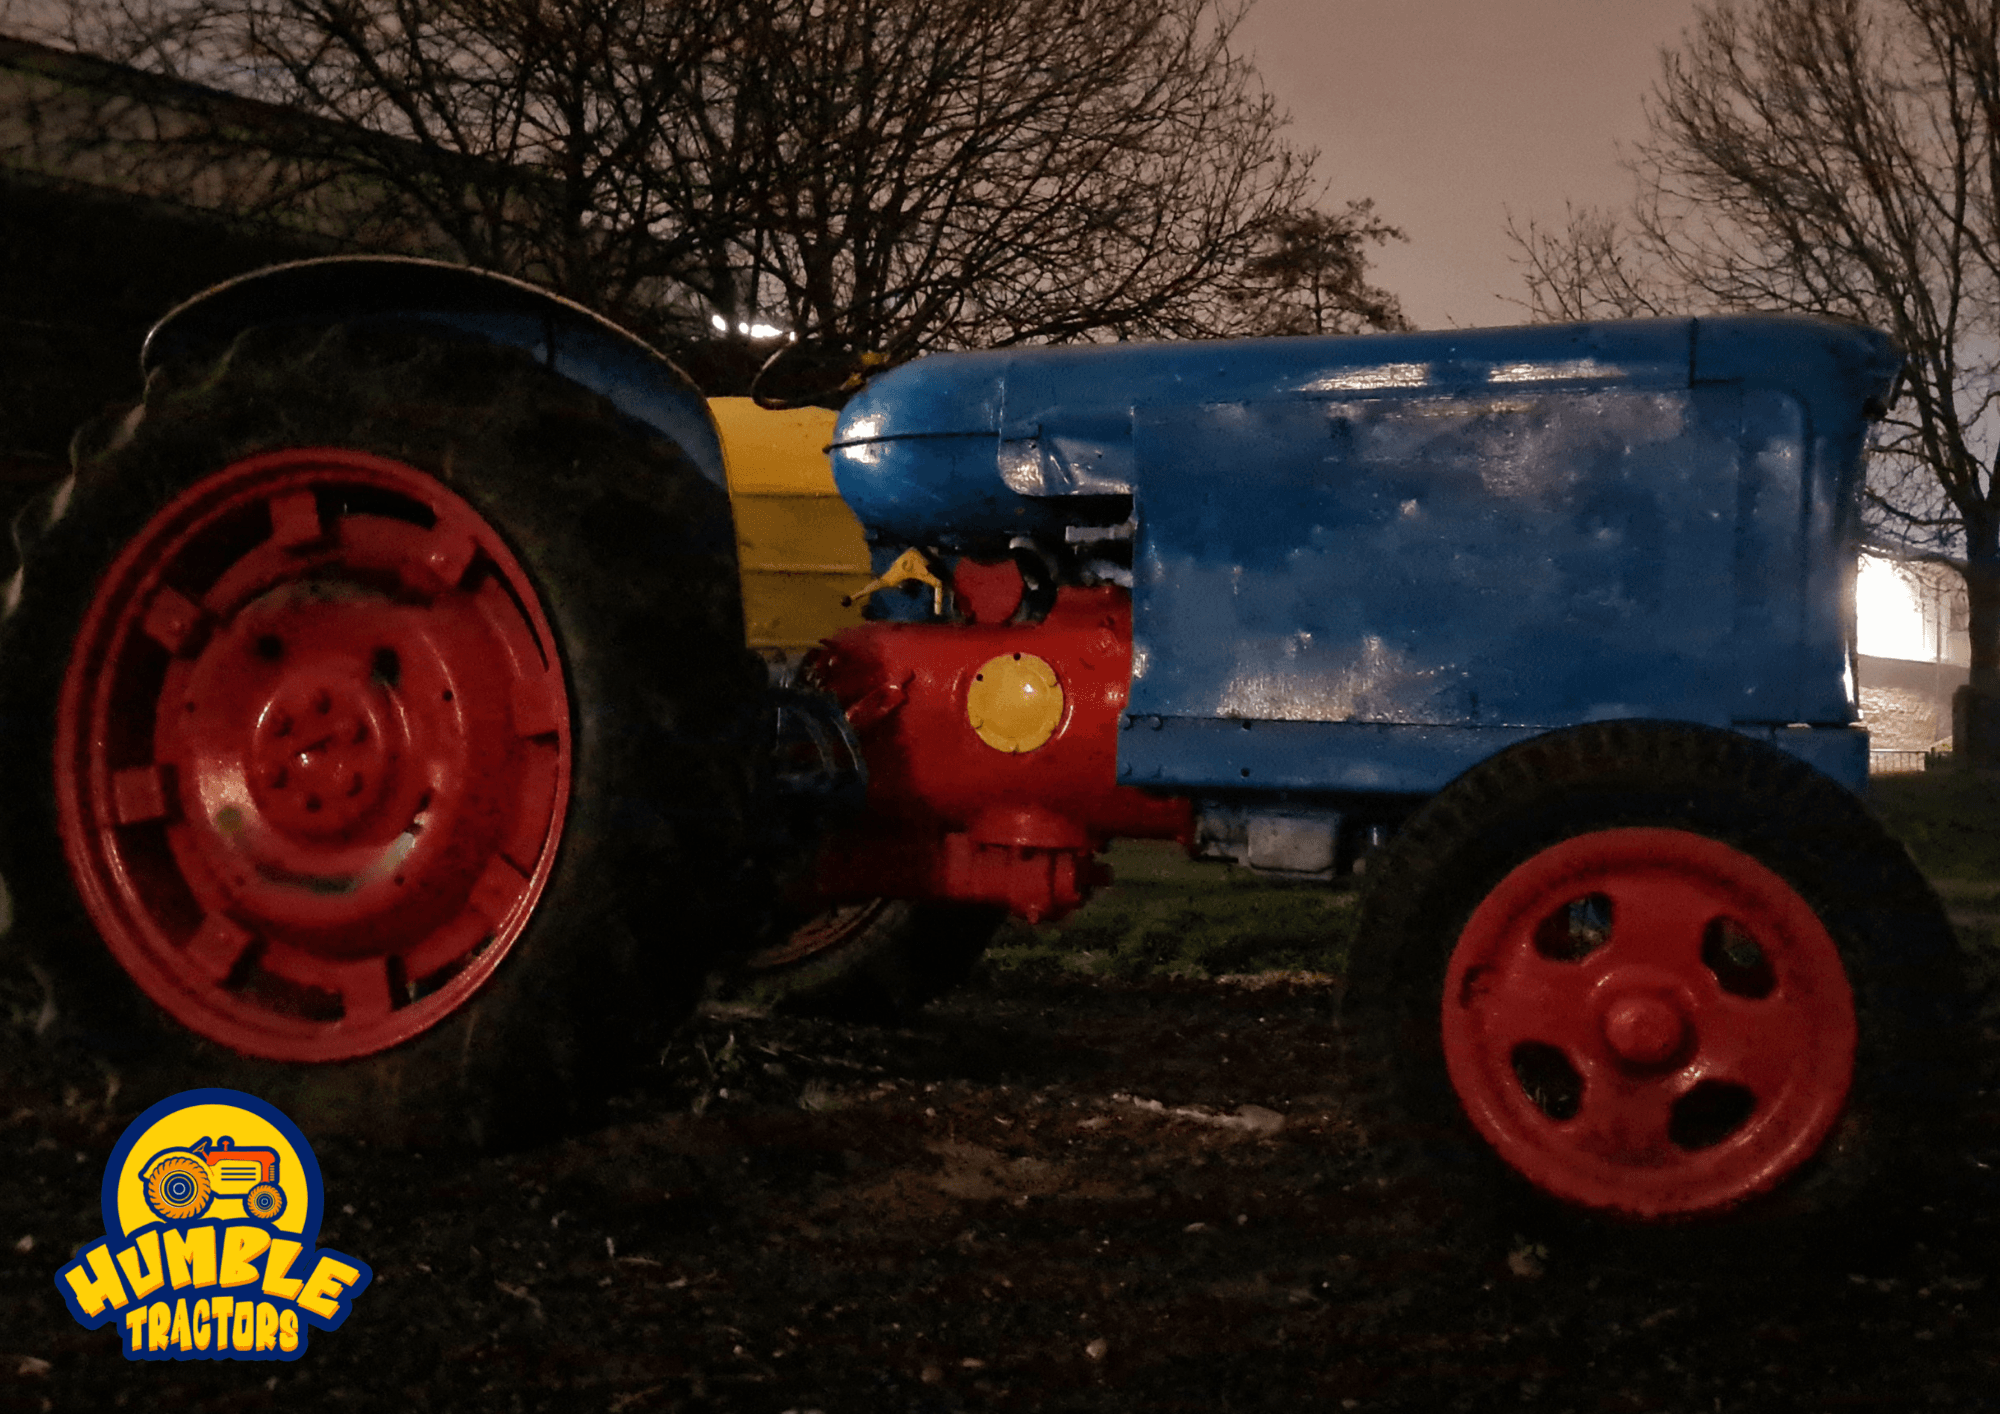 Humble Tractor #53